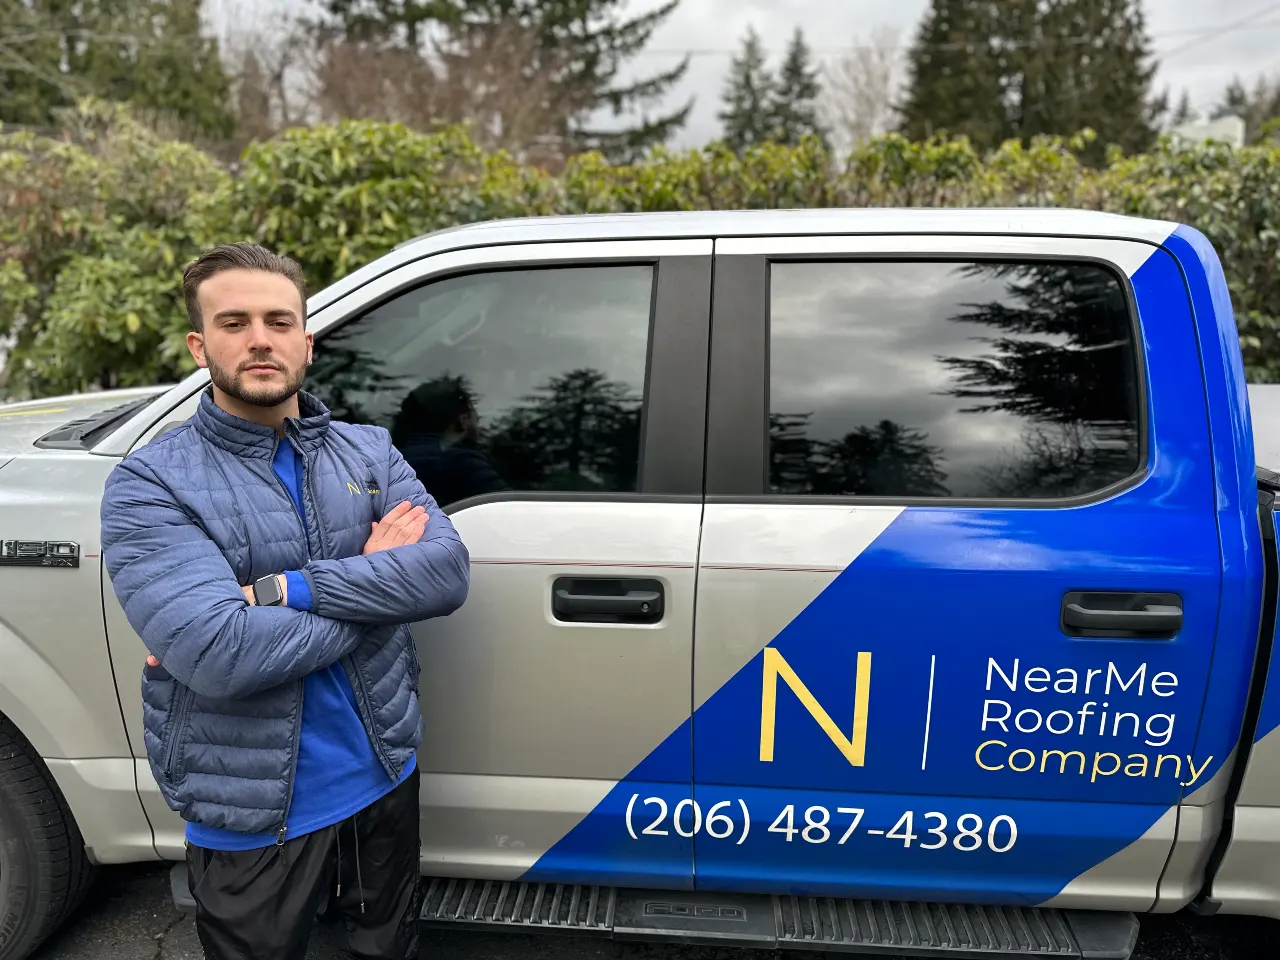 Best Roofing Company in seattle